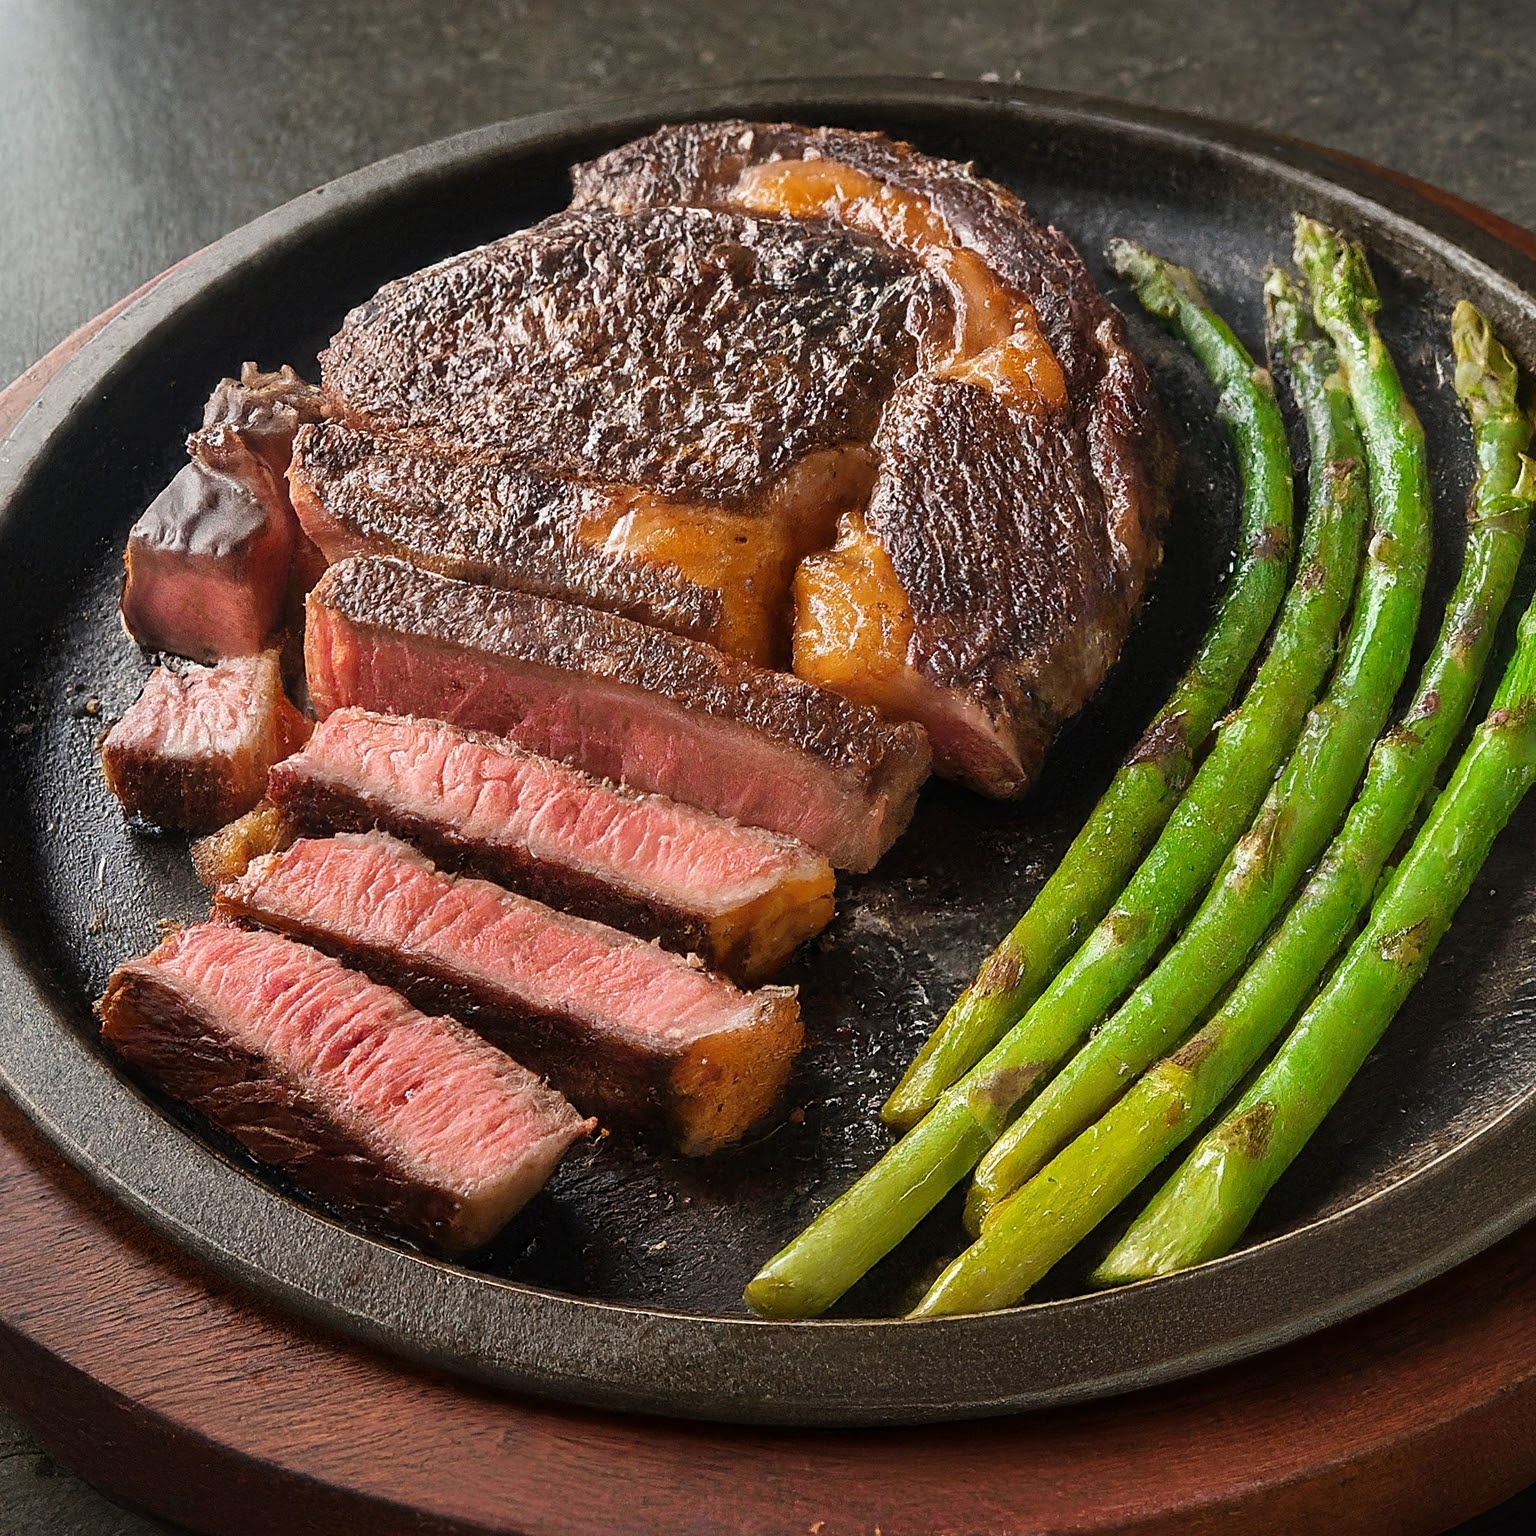 All Meat, All the Time: Debunking the Carnivore Craze (But Is There Any Merit?)